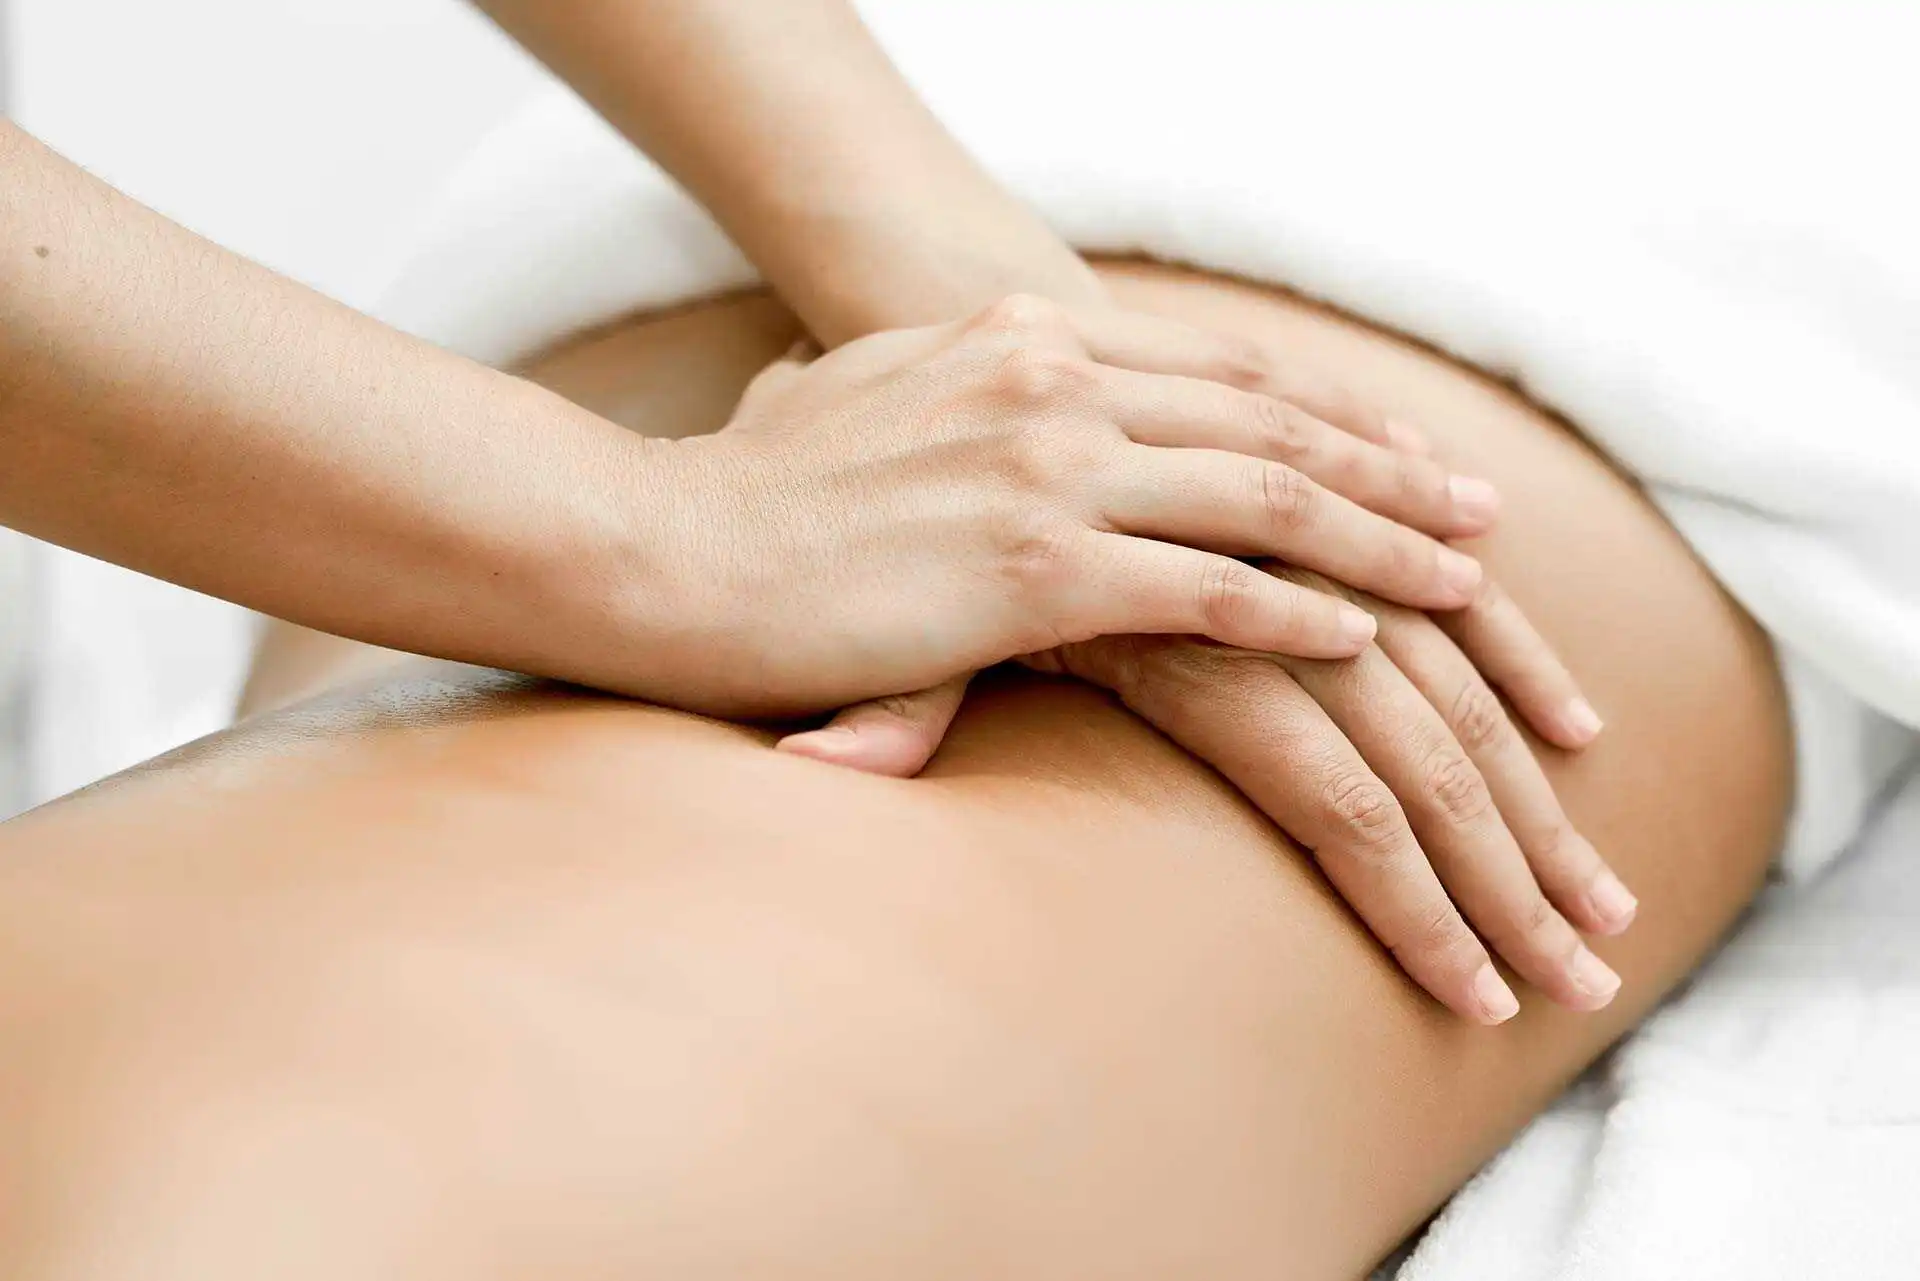 Body Rubs For Healthy Living In New York City - Scoopearth.com